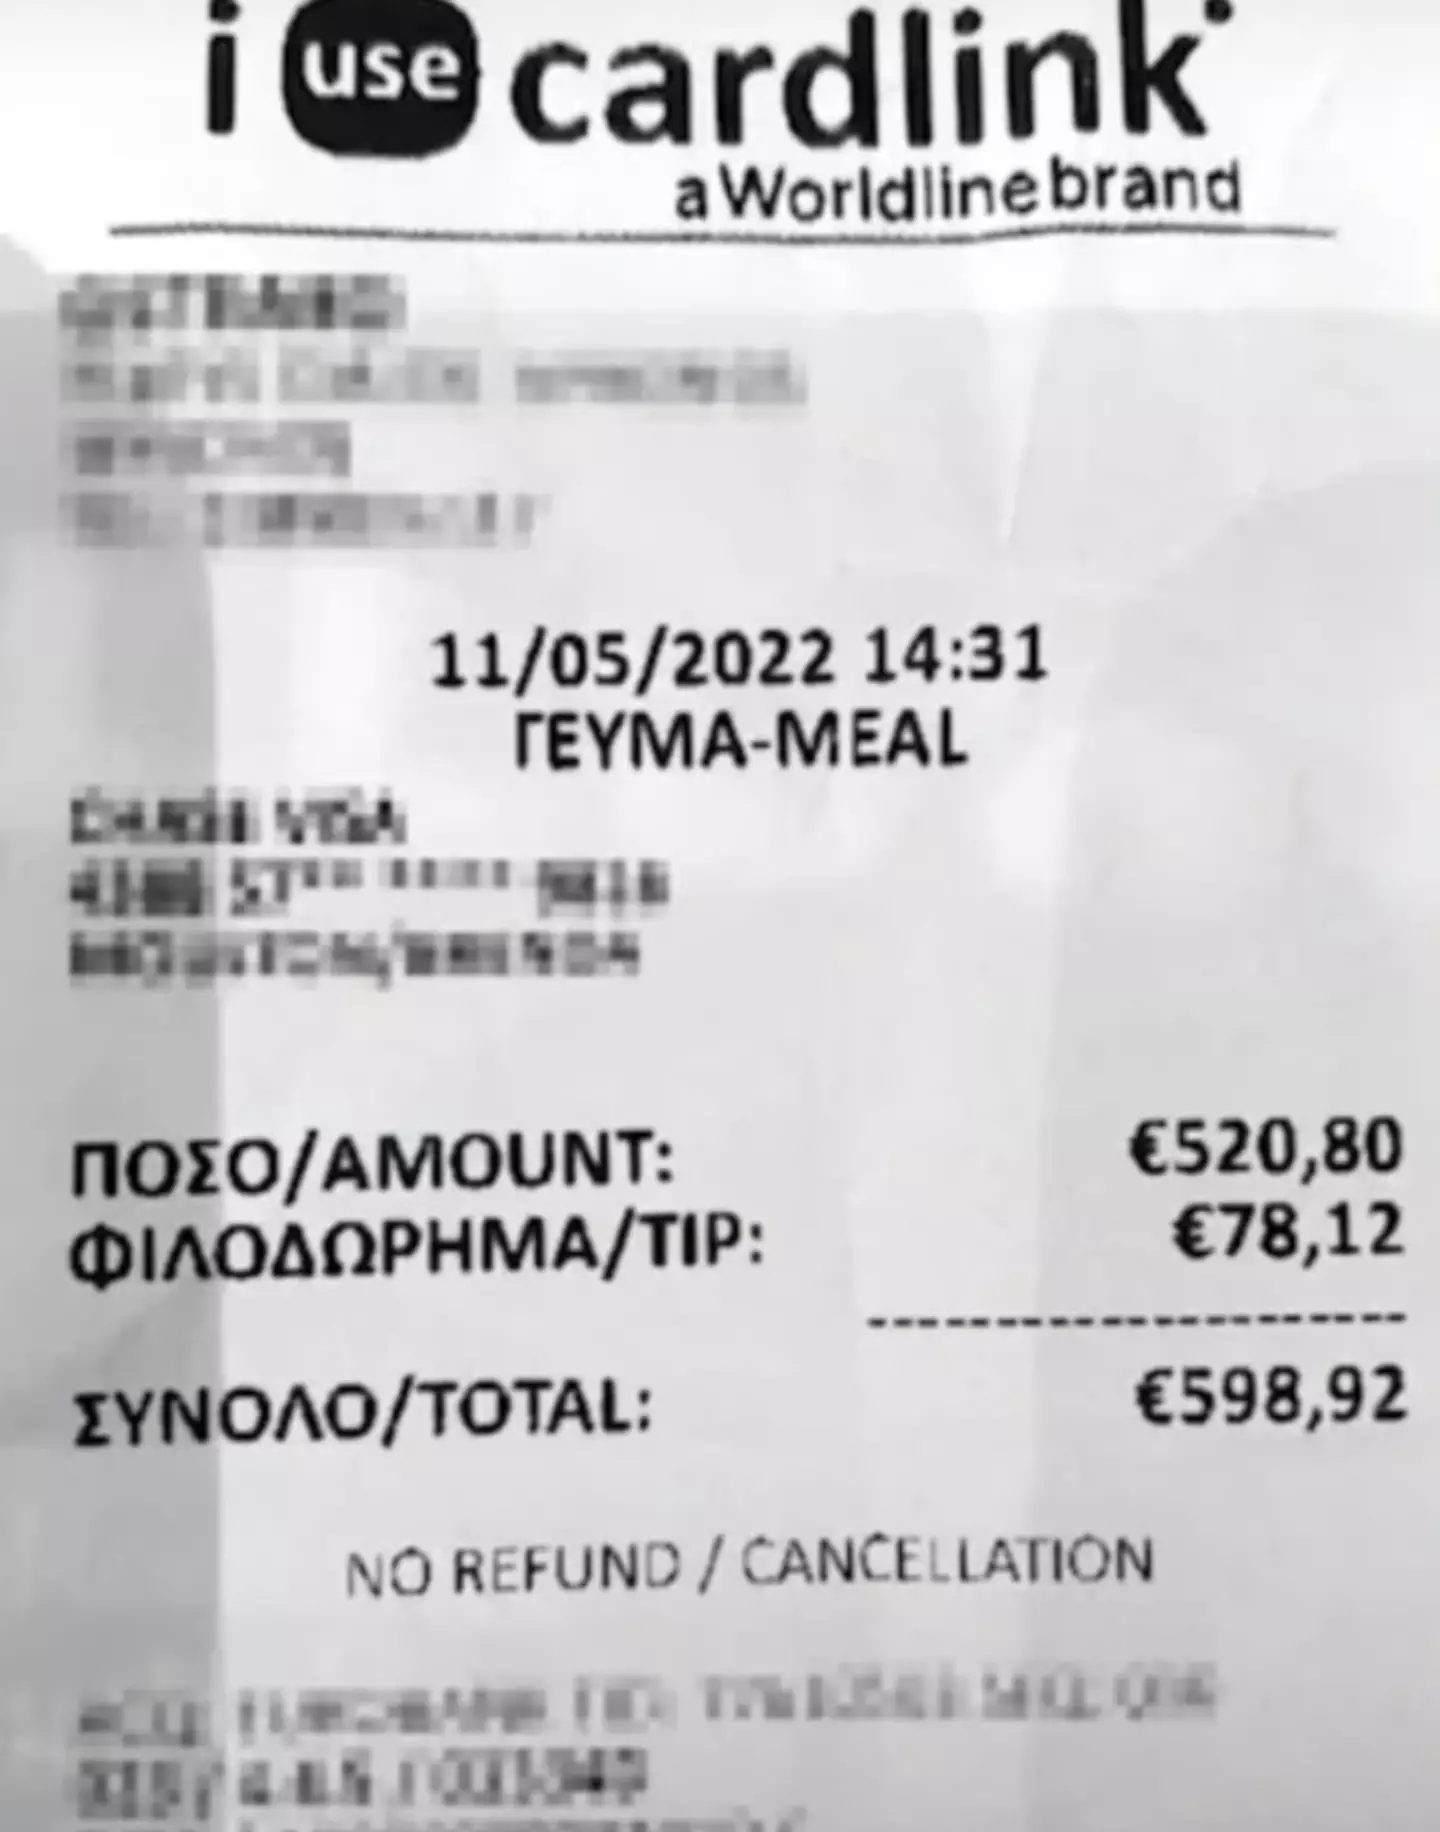 The bill came to just under €600 (£512).